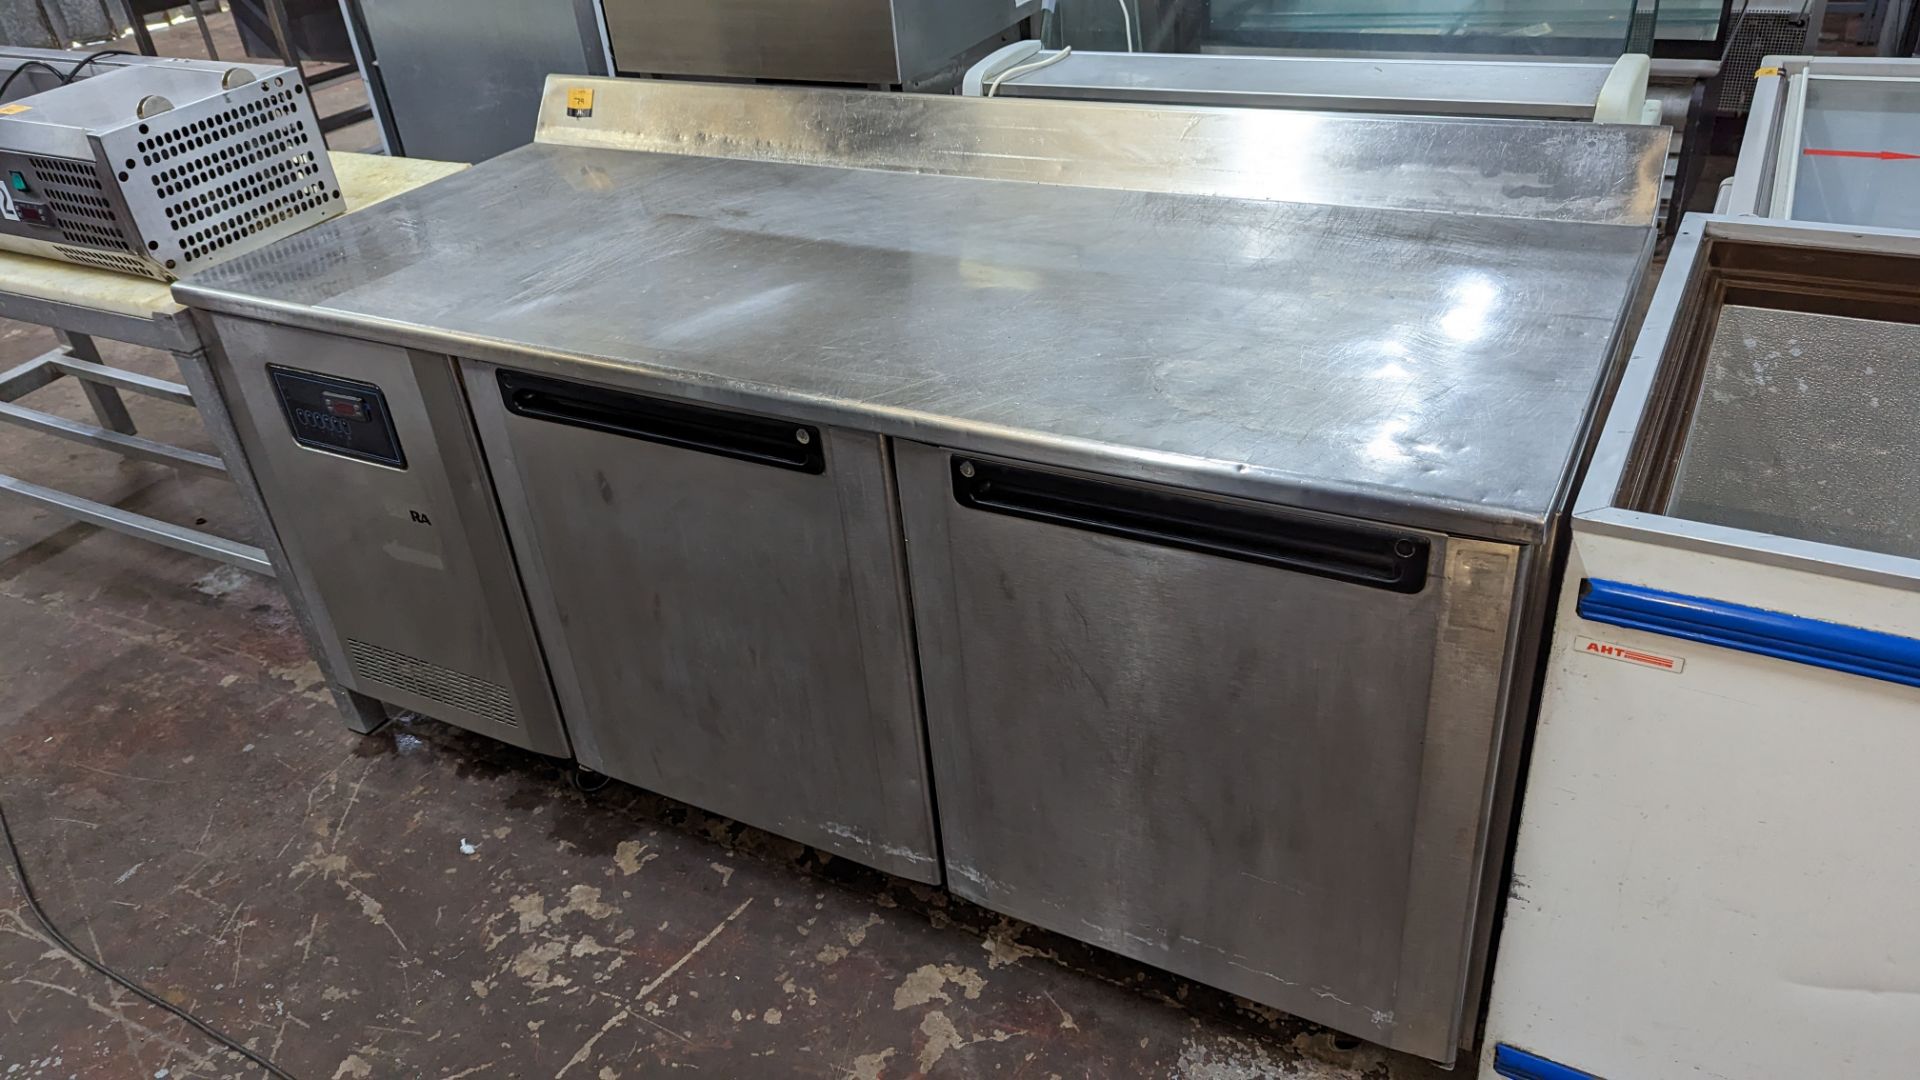 Large stainless steel refrigerated prep cabinet measuring approximately 183cm x 80cm